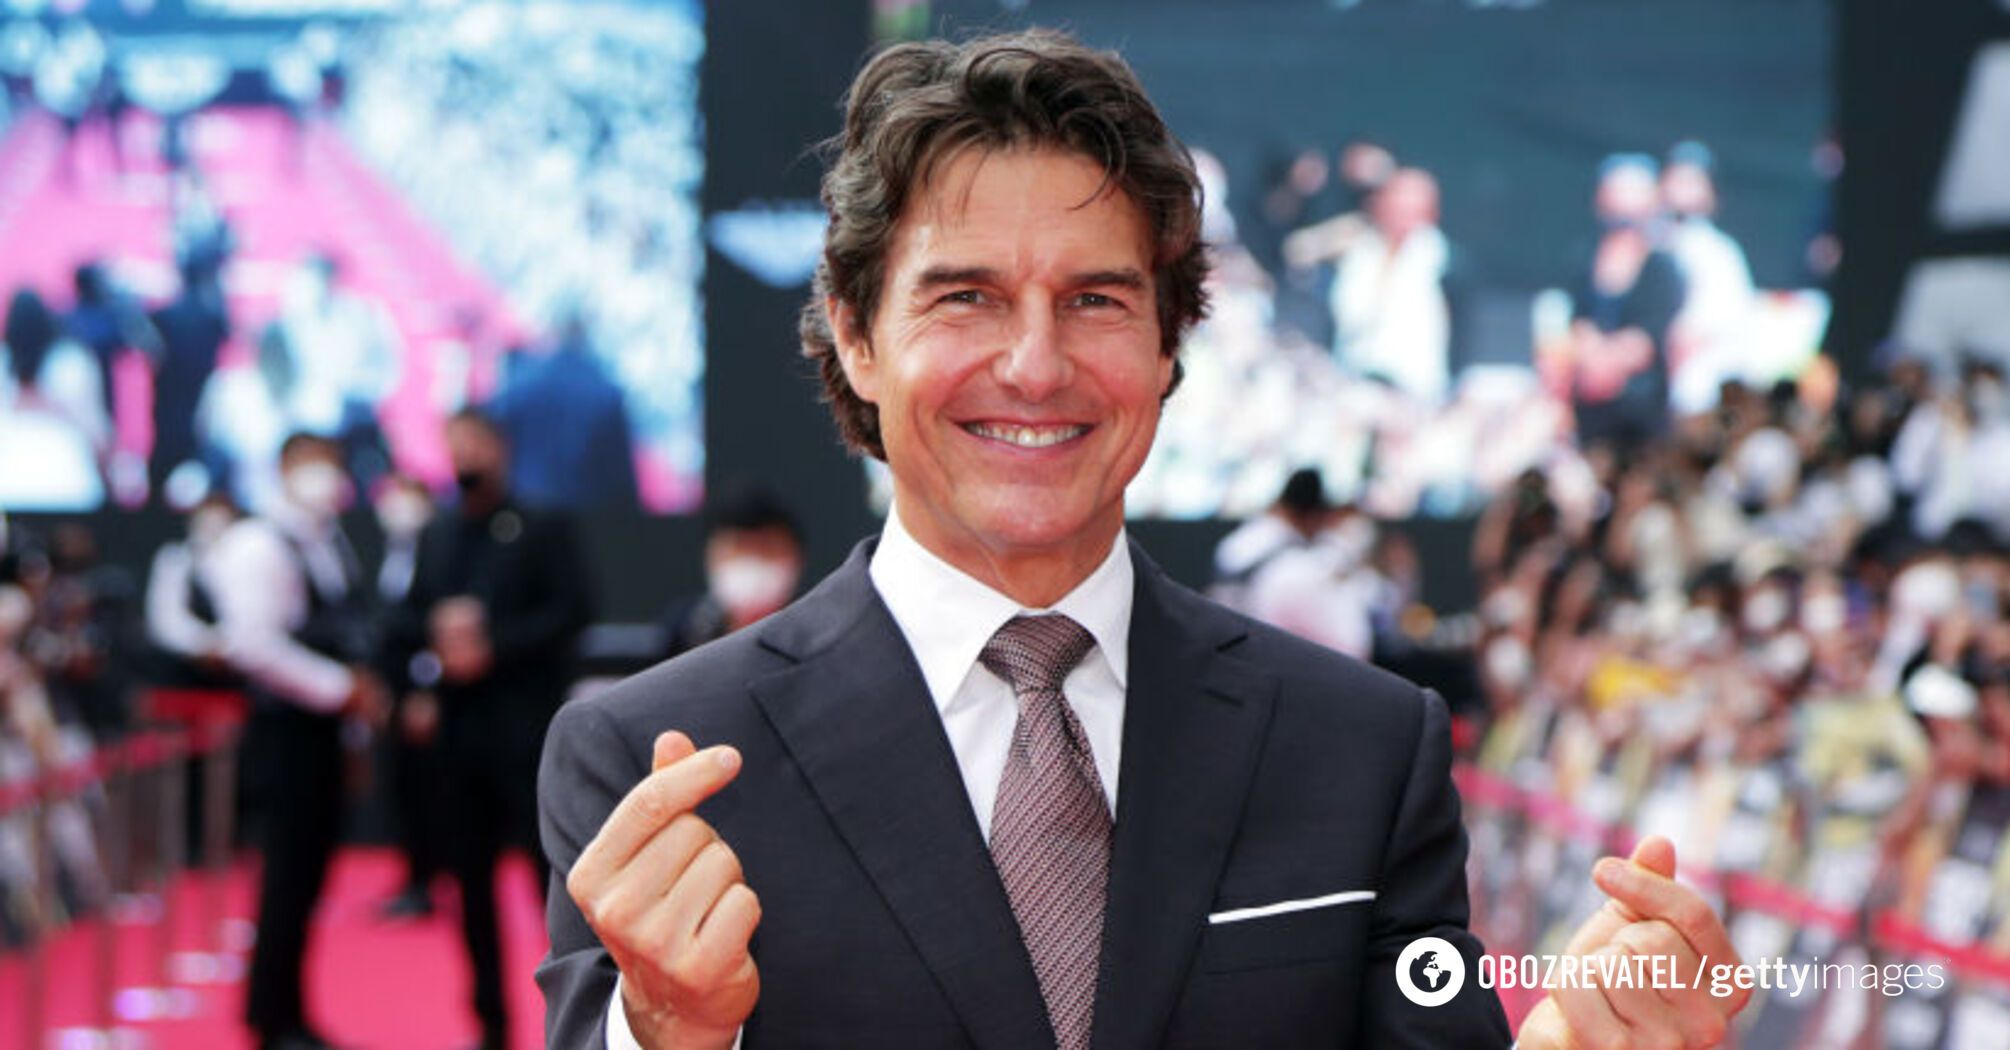 Not just Mission Impossible: 5 movies that best reveal Tom Cruise as an actor